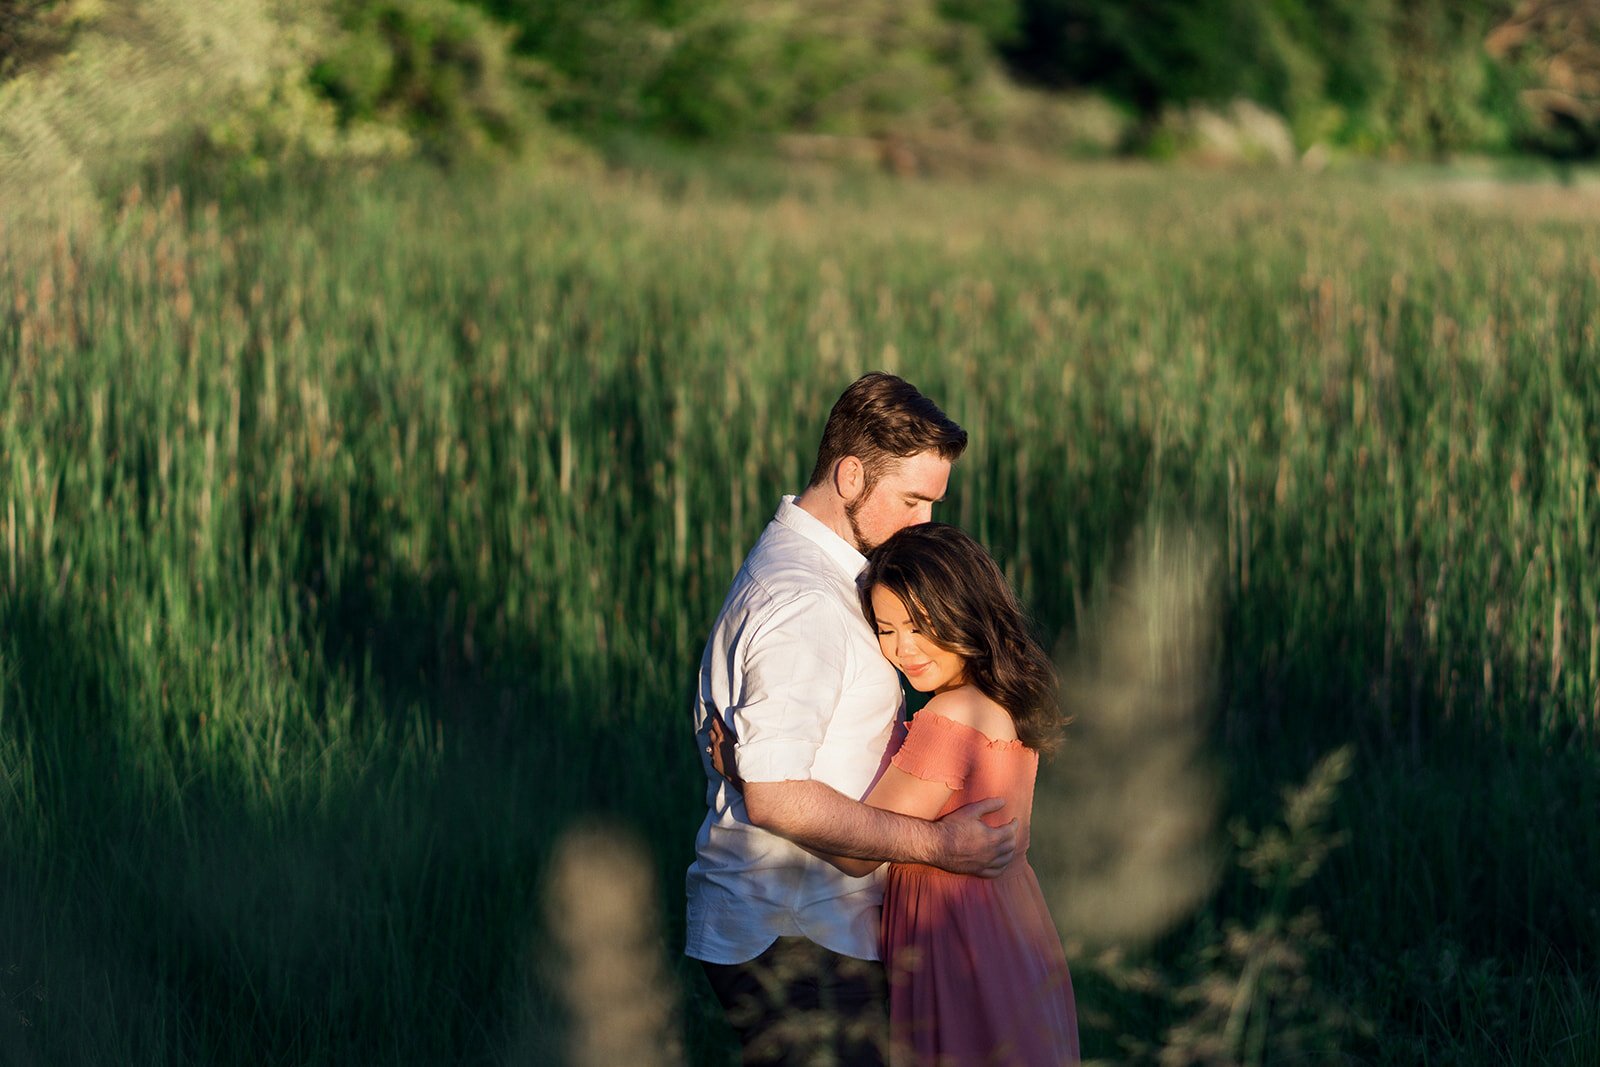 A woman in a pink linen dress holds her fiancee in a romantic grass field.